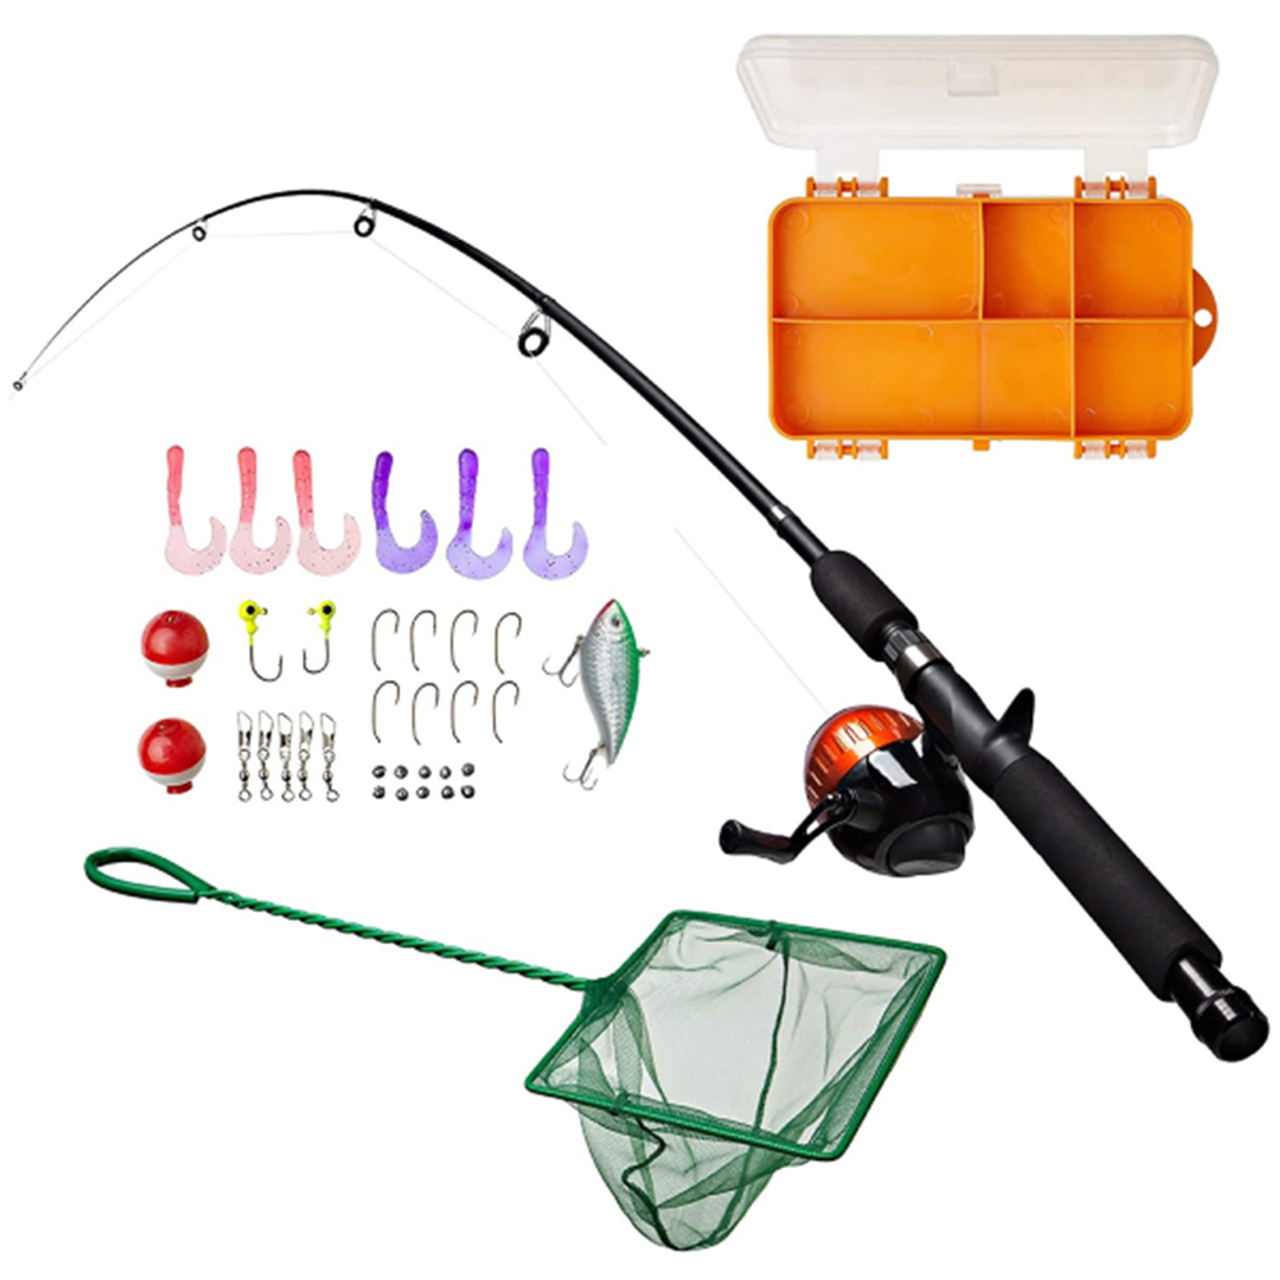 Kids' Fishing Kit with 17-Inch Fishing Rod product image